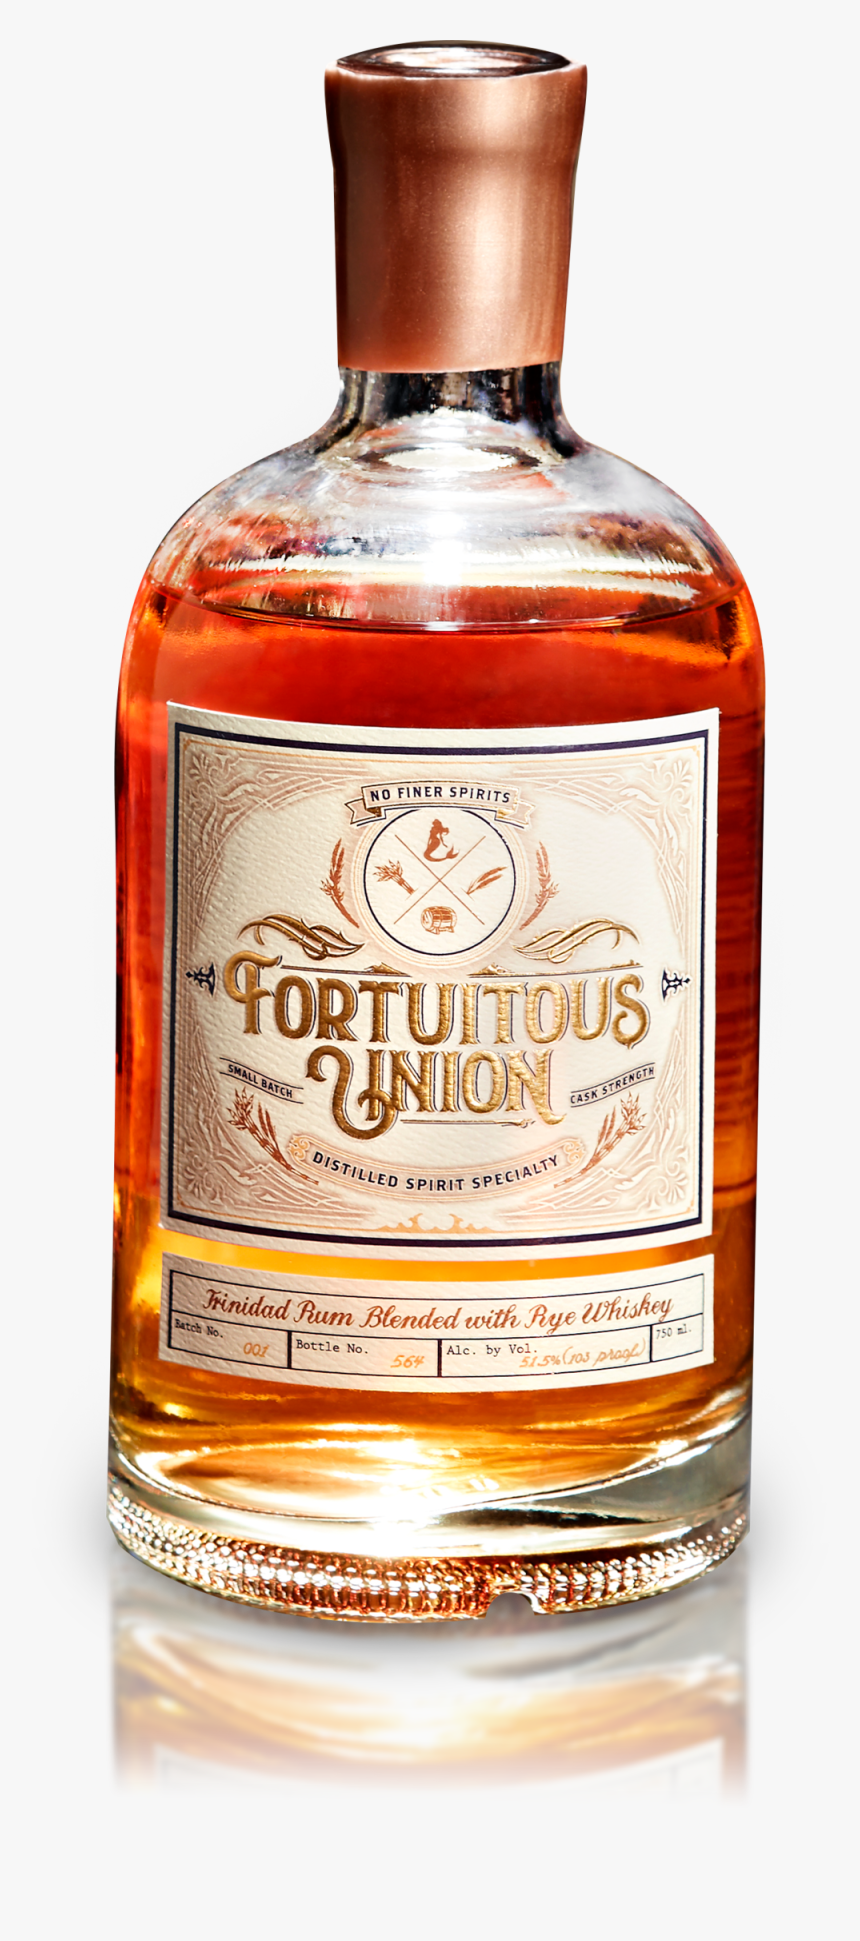 Fortuitous Union Bottle - Glass Bottle, HD Png Download, Free Download